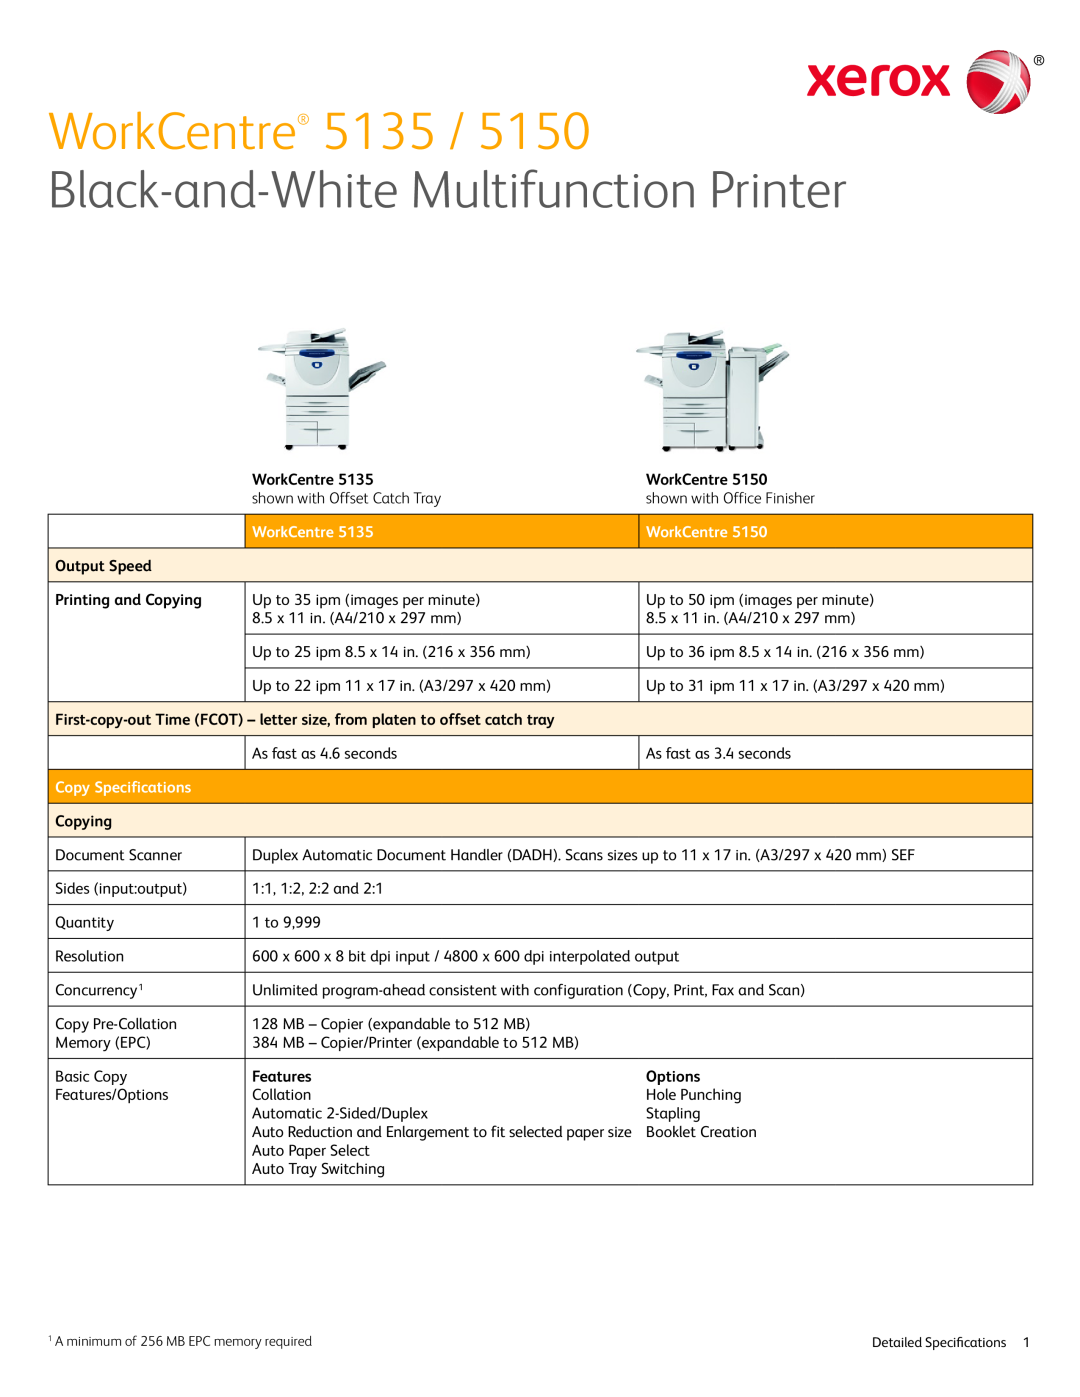 Xerox 5135 specifications WorkCentre, shown with Offset Catch Tray, Output Speed, Printing and Copying, Features, Options 